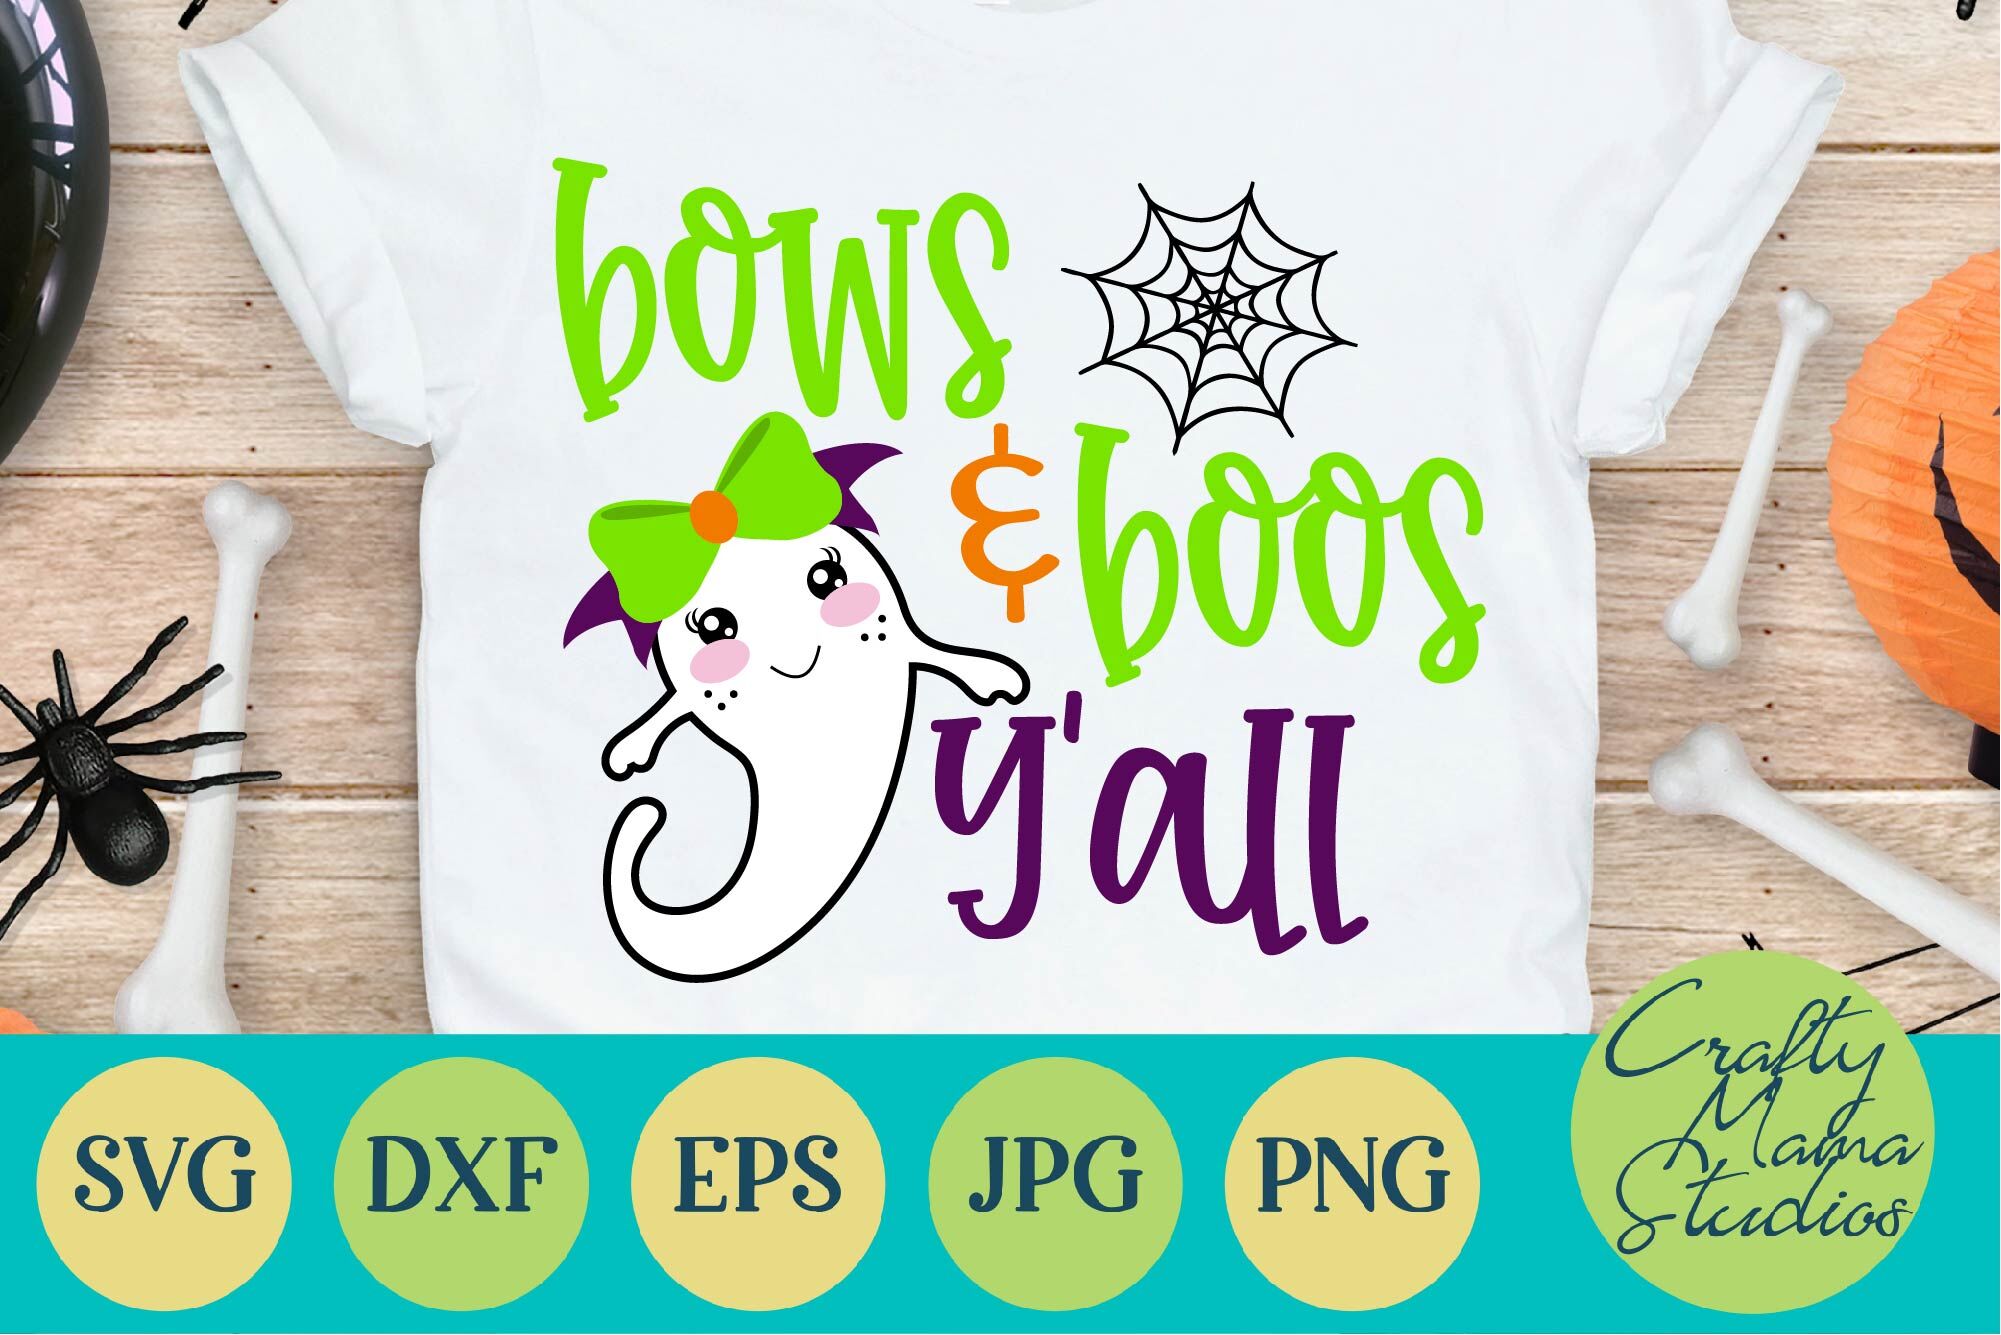 Ghost Svg Bows And Boos Y All Svg Halloween Girl Ghost Svg By Crafty Mama Studios Thehungryjpeg Com